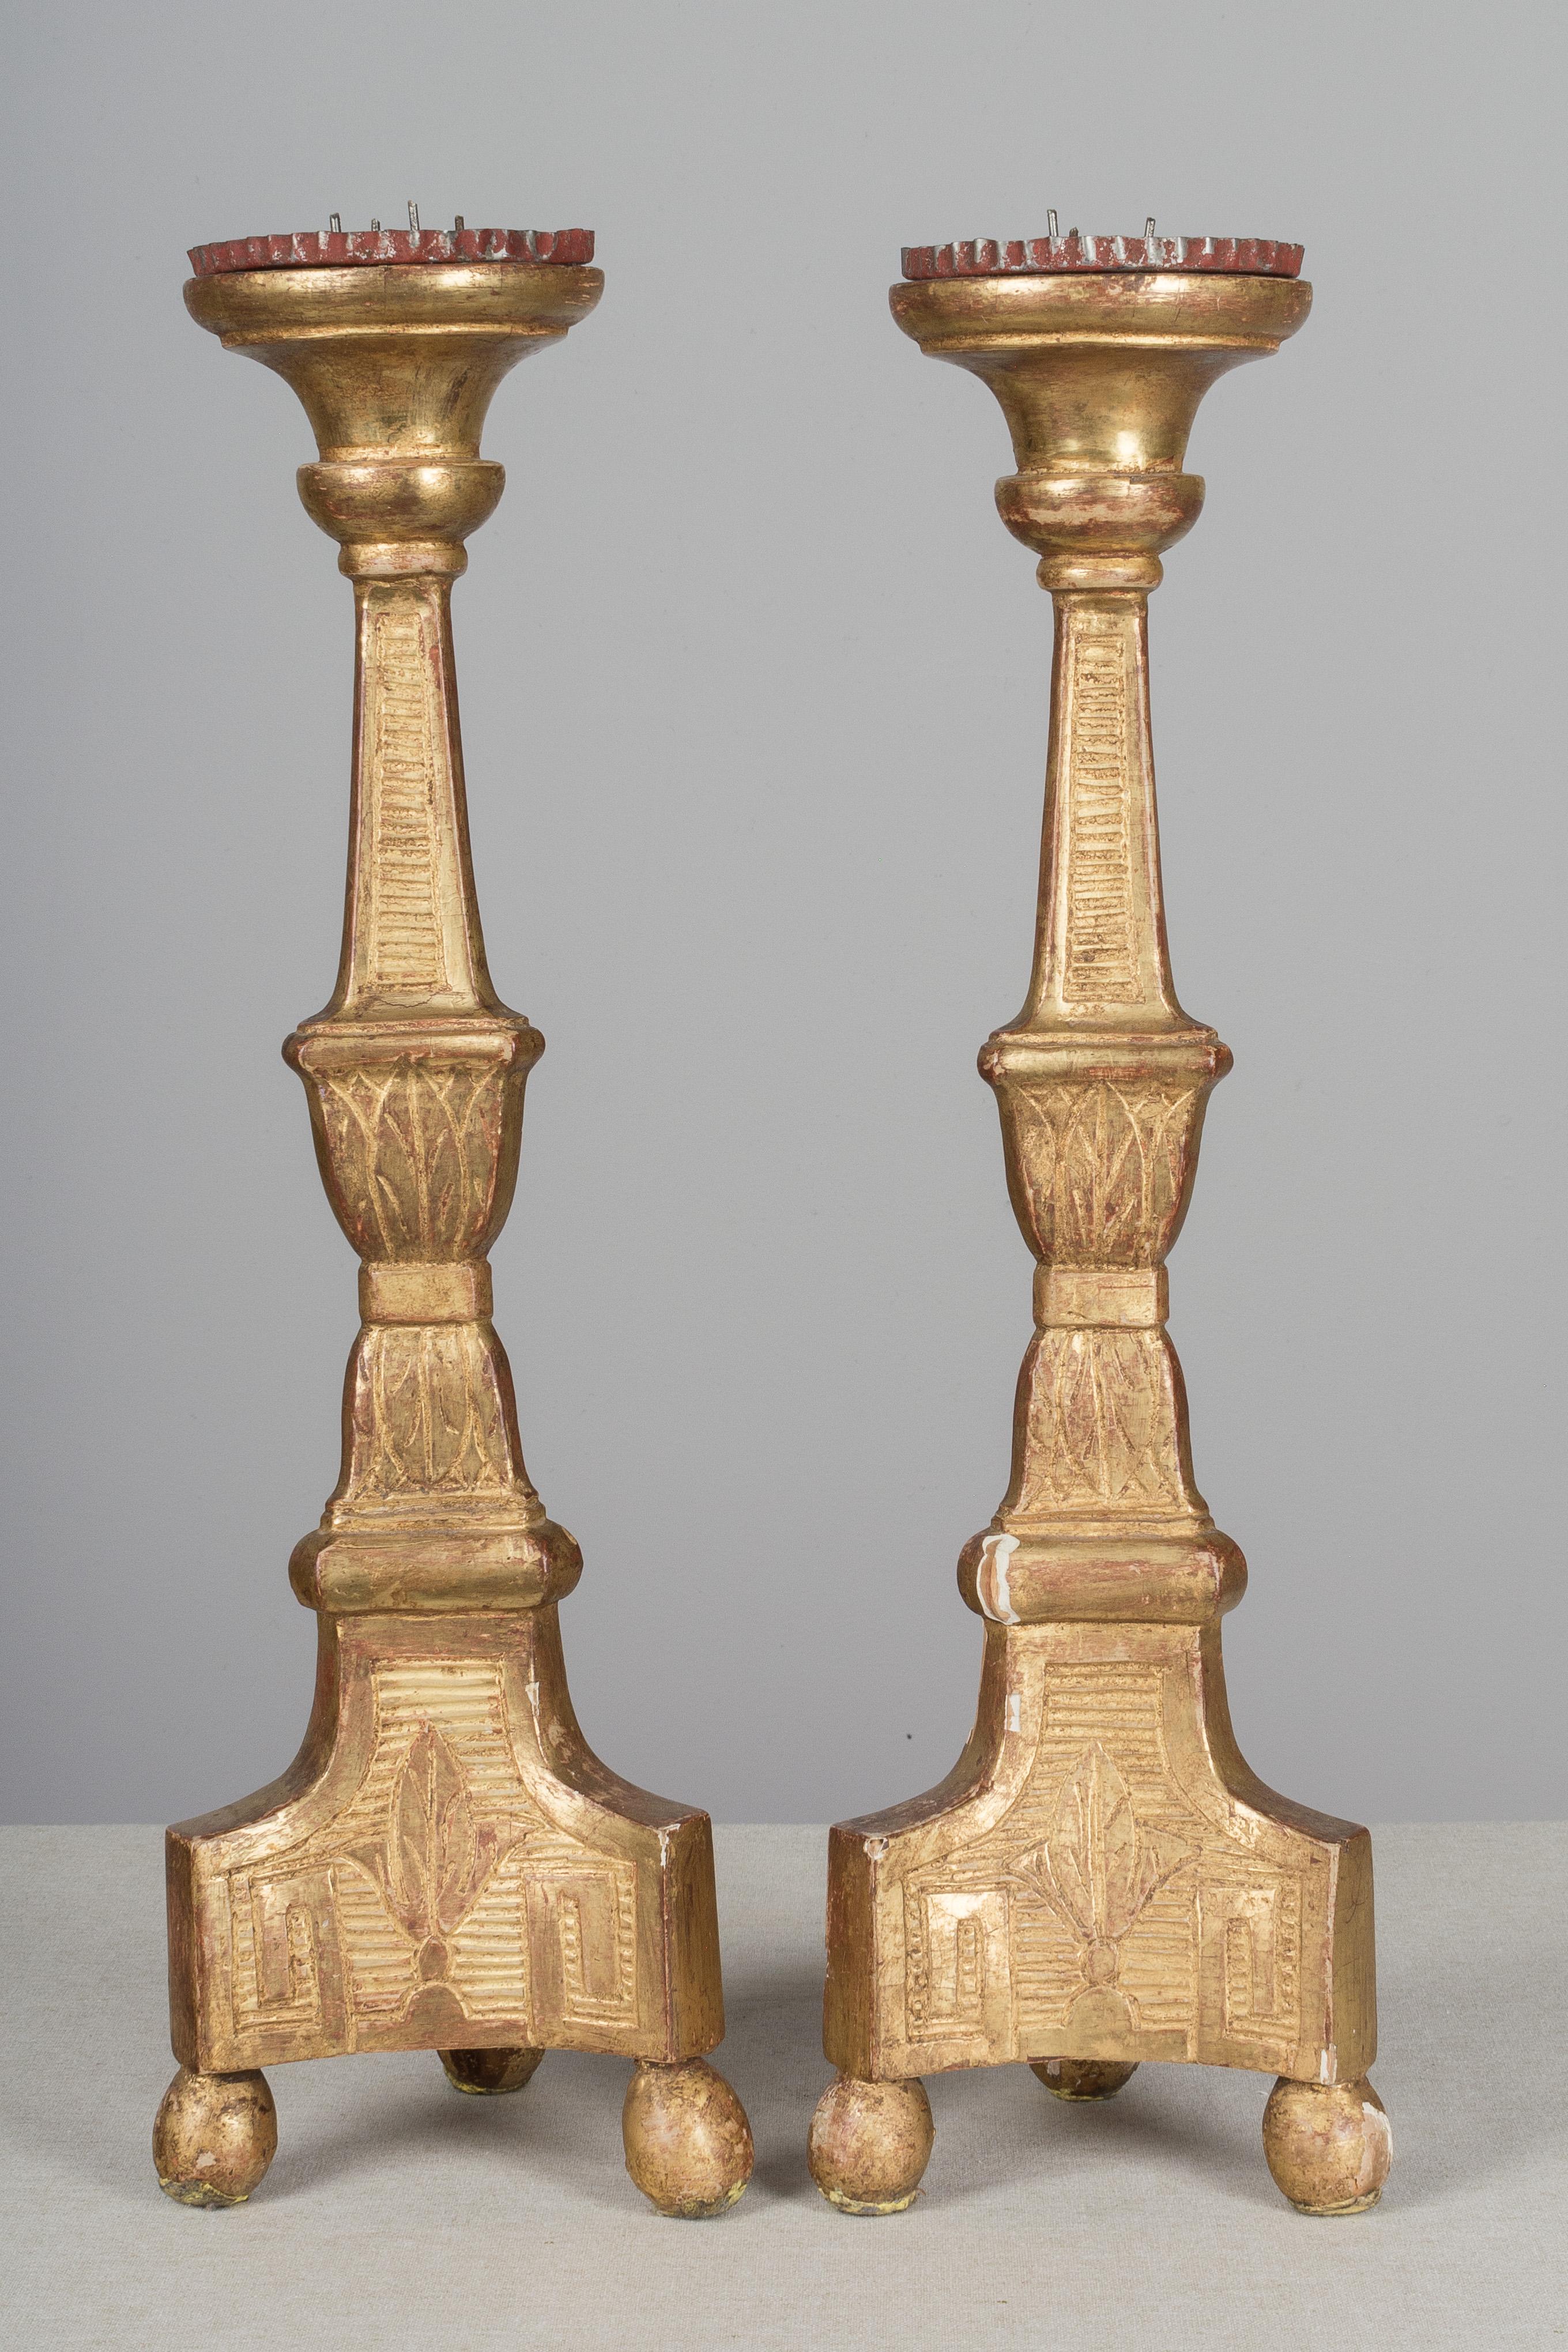 Hand-Crafted Pair of 19th Century French Candlesticks